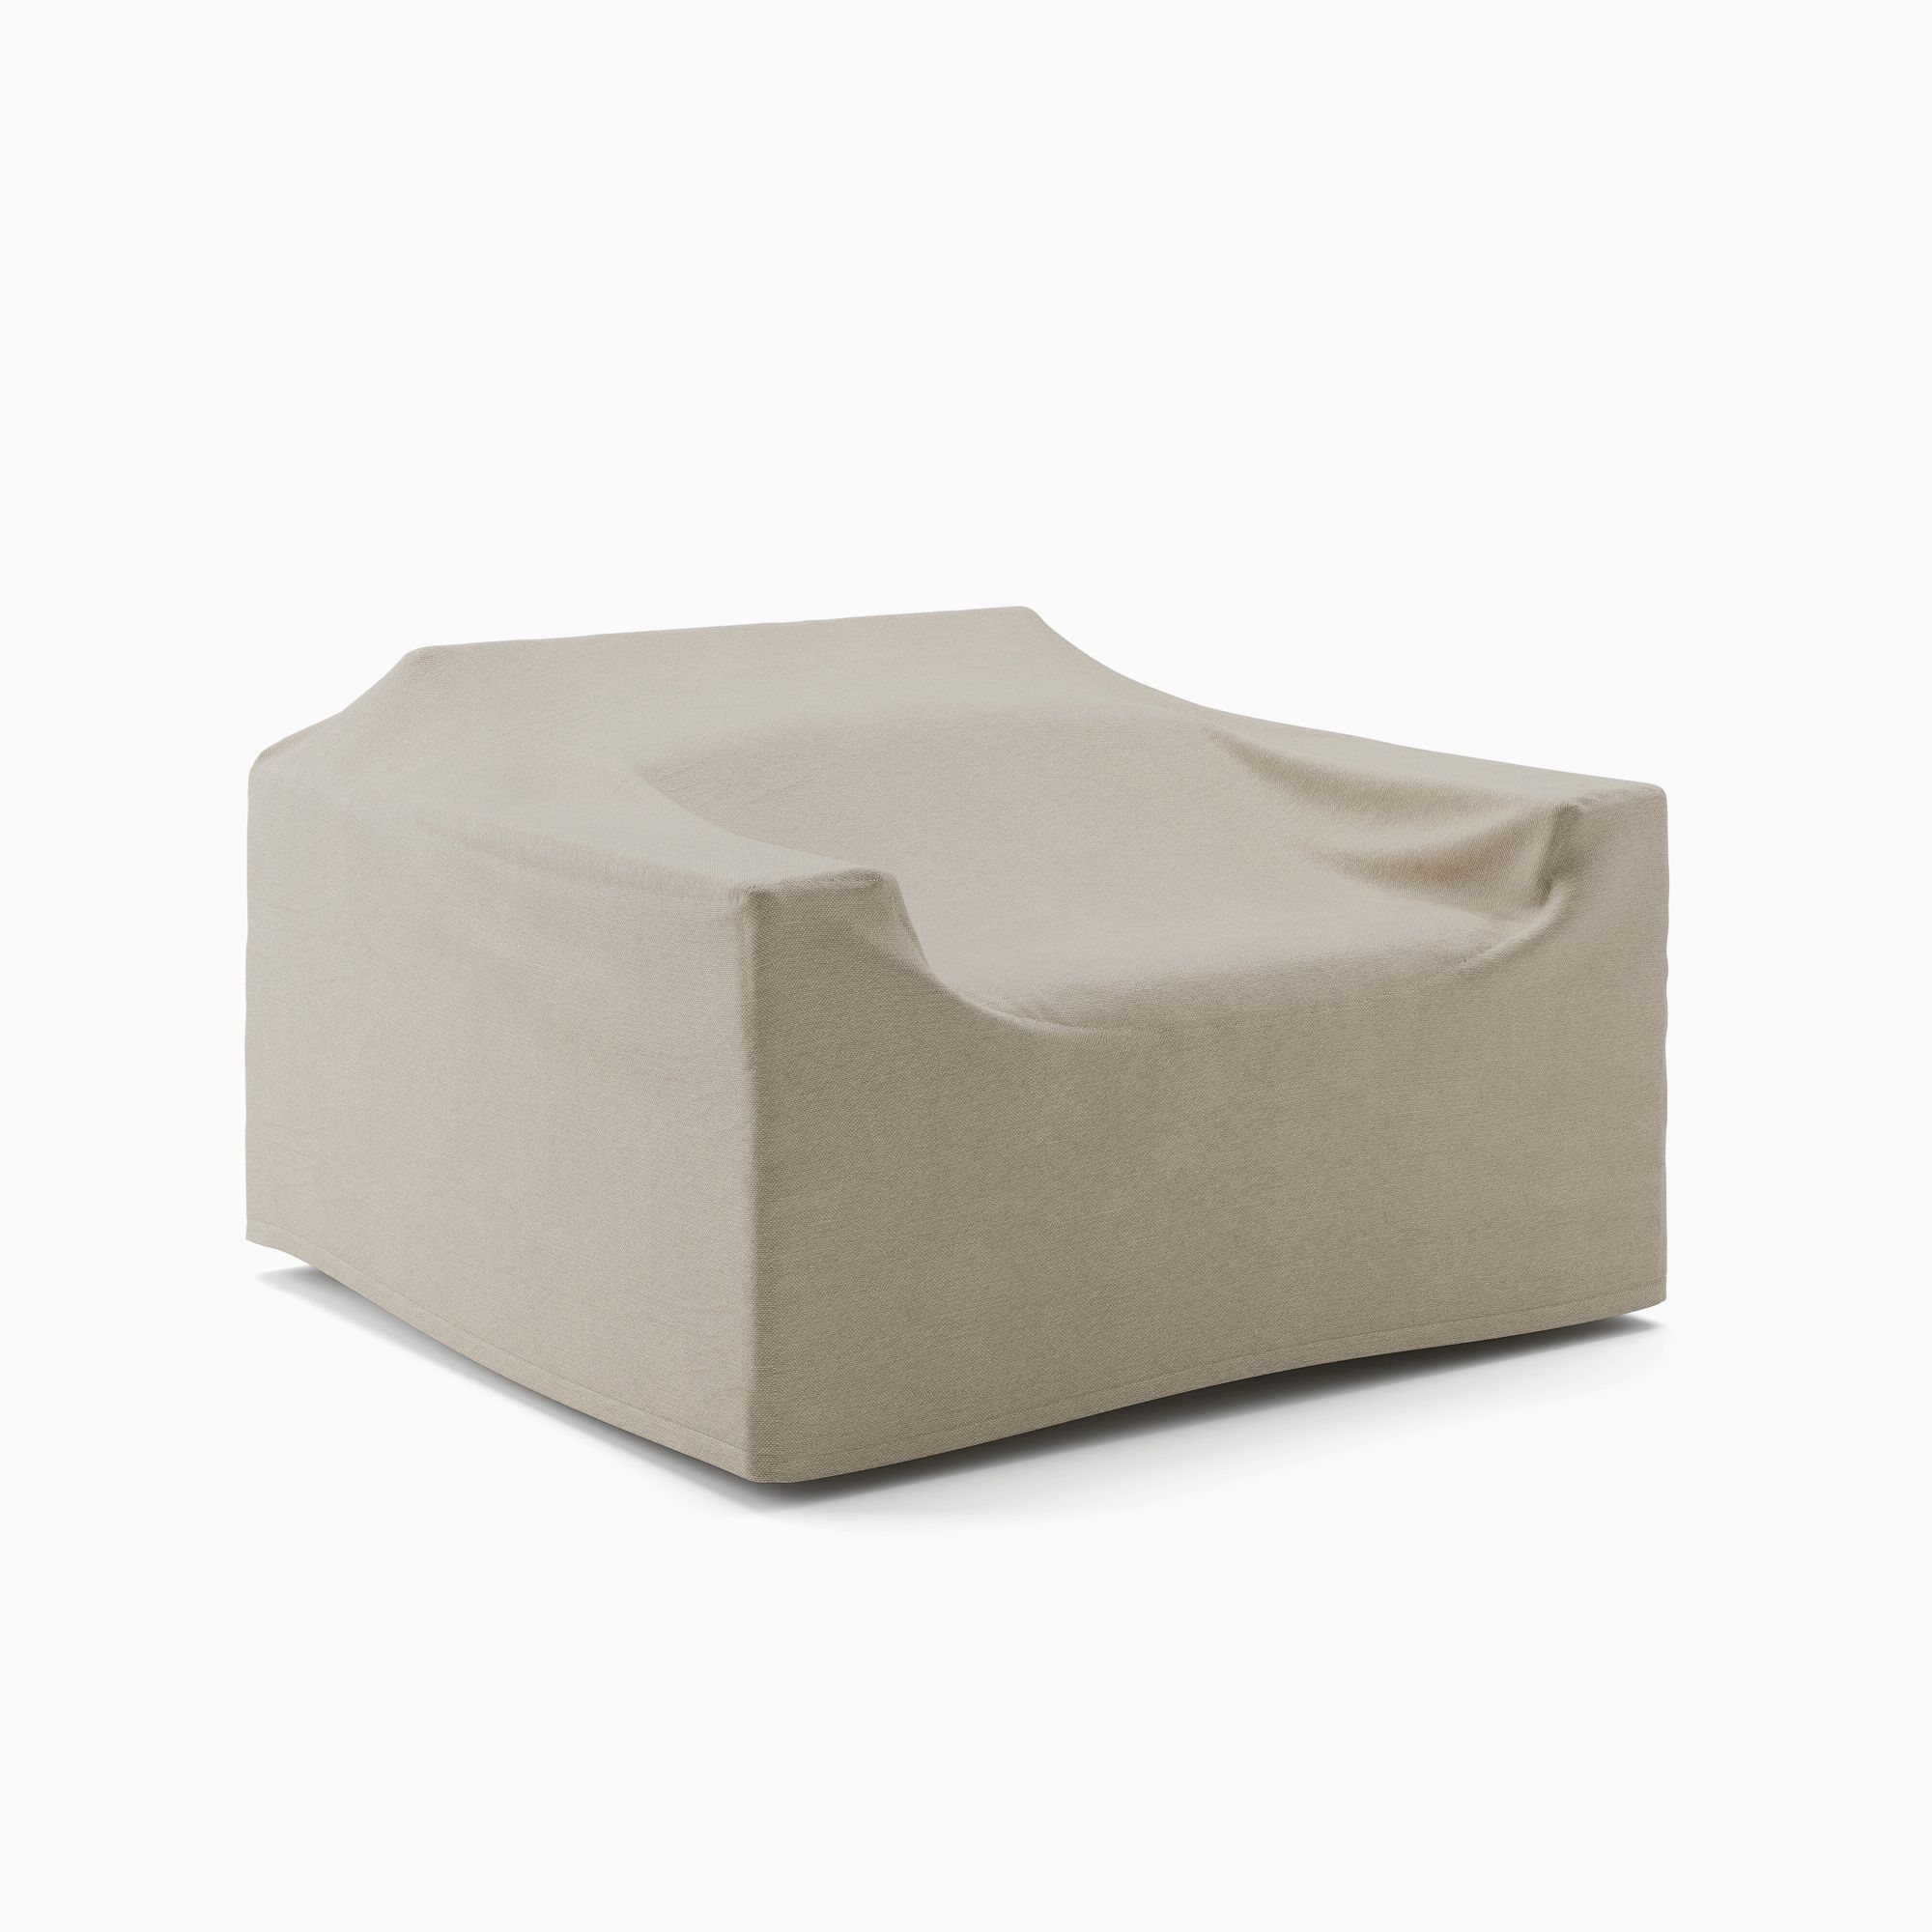 Telluride Outdoor Swivel Chair Protective Cover | West Elm